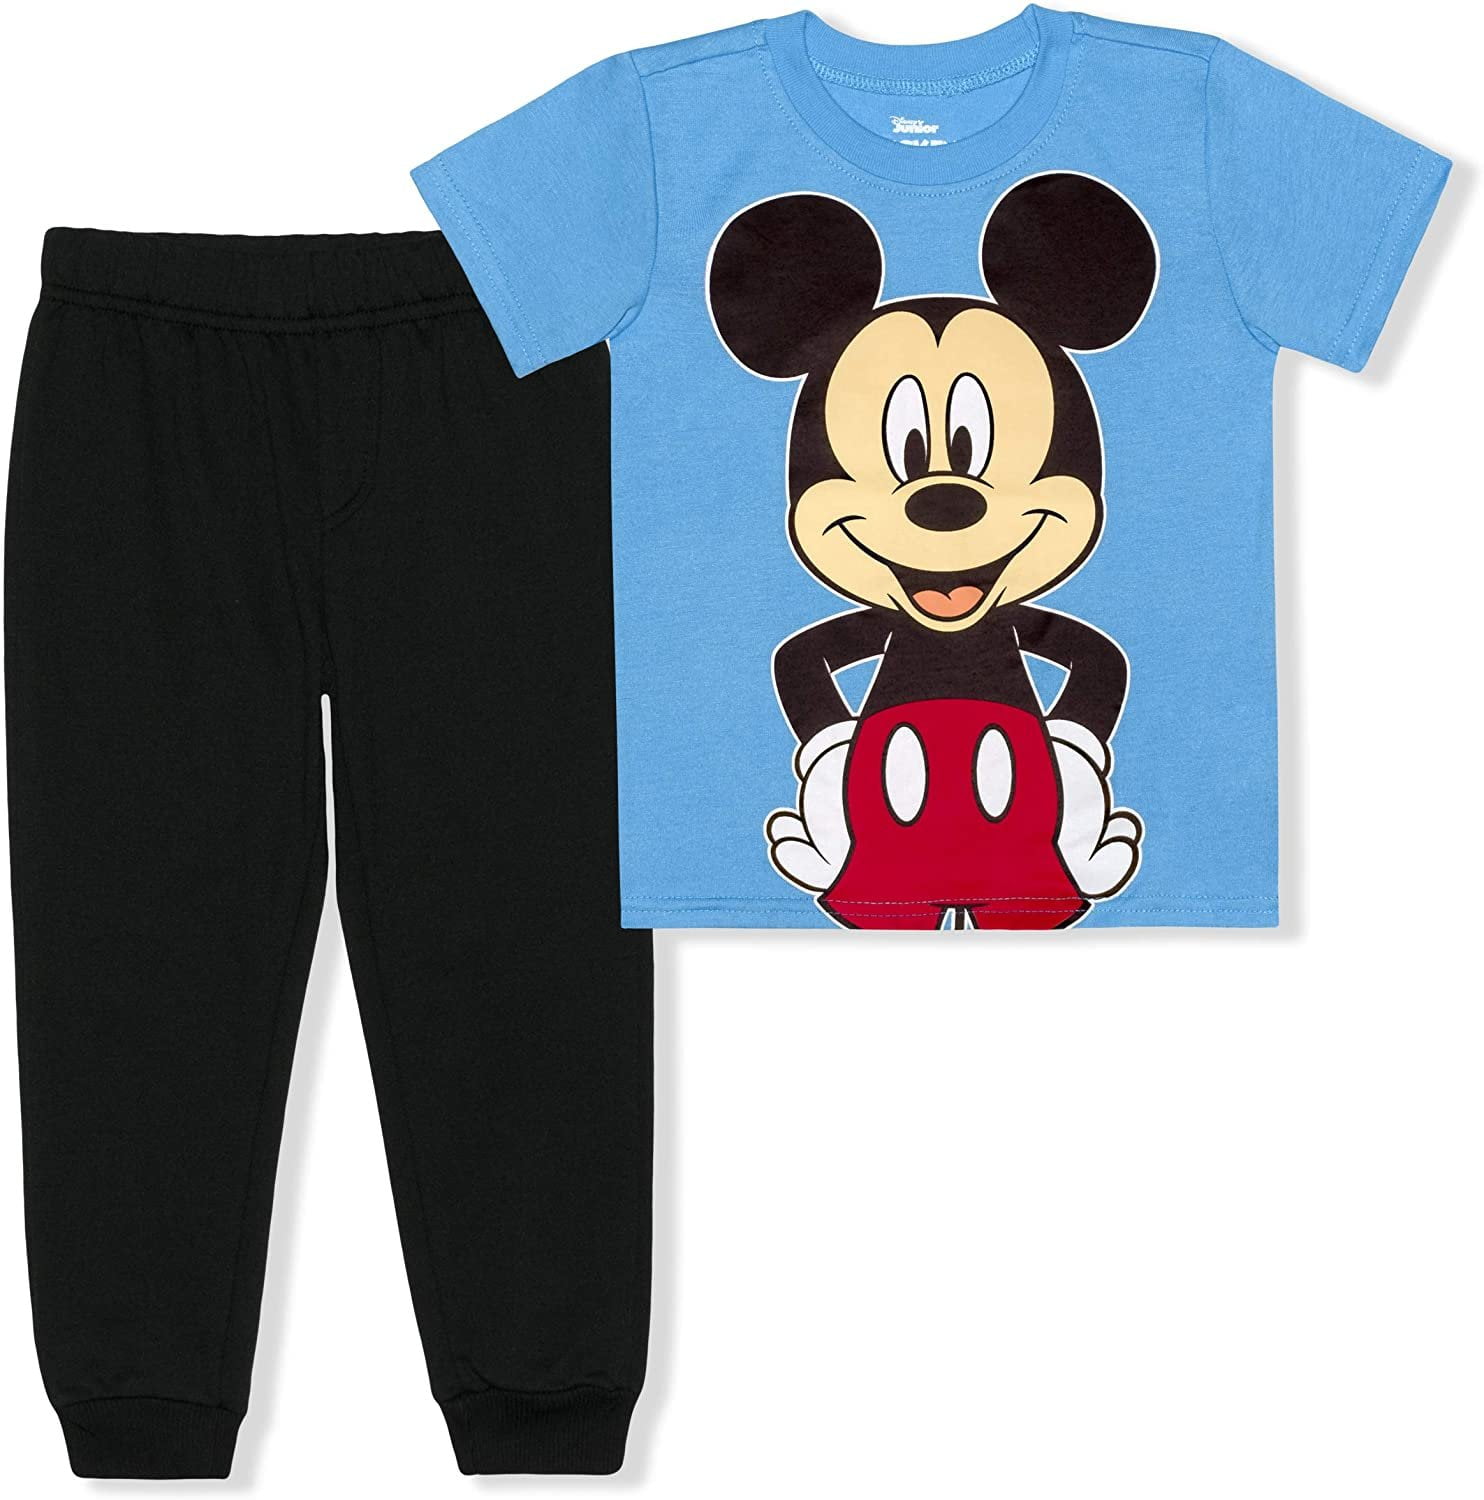 Mickey Mouse Toddler Boys Navy & Red 2pc Sweatsuit Set Size 2T 3T 4T 